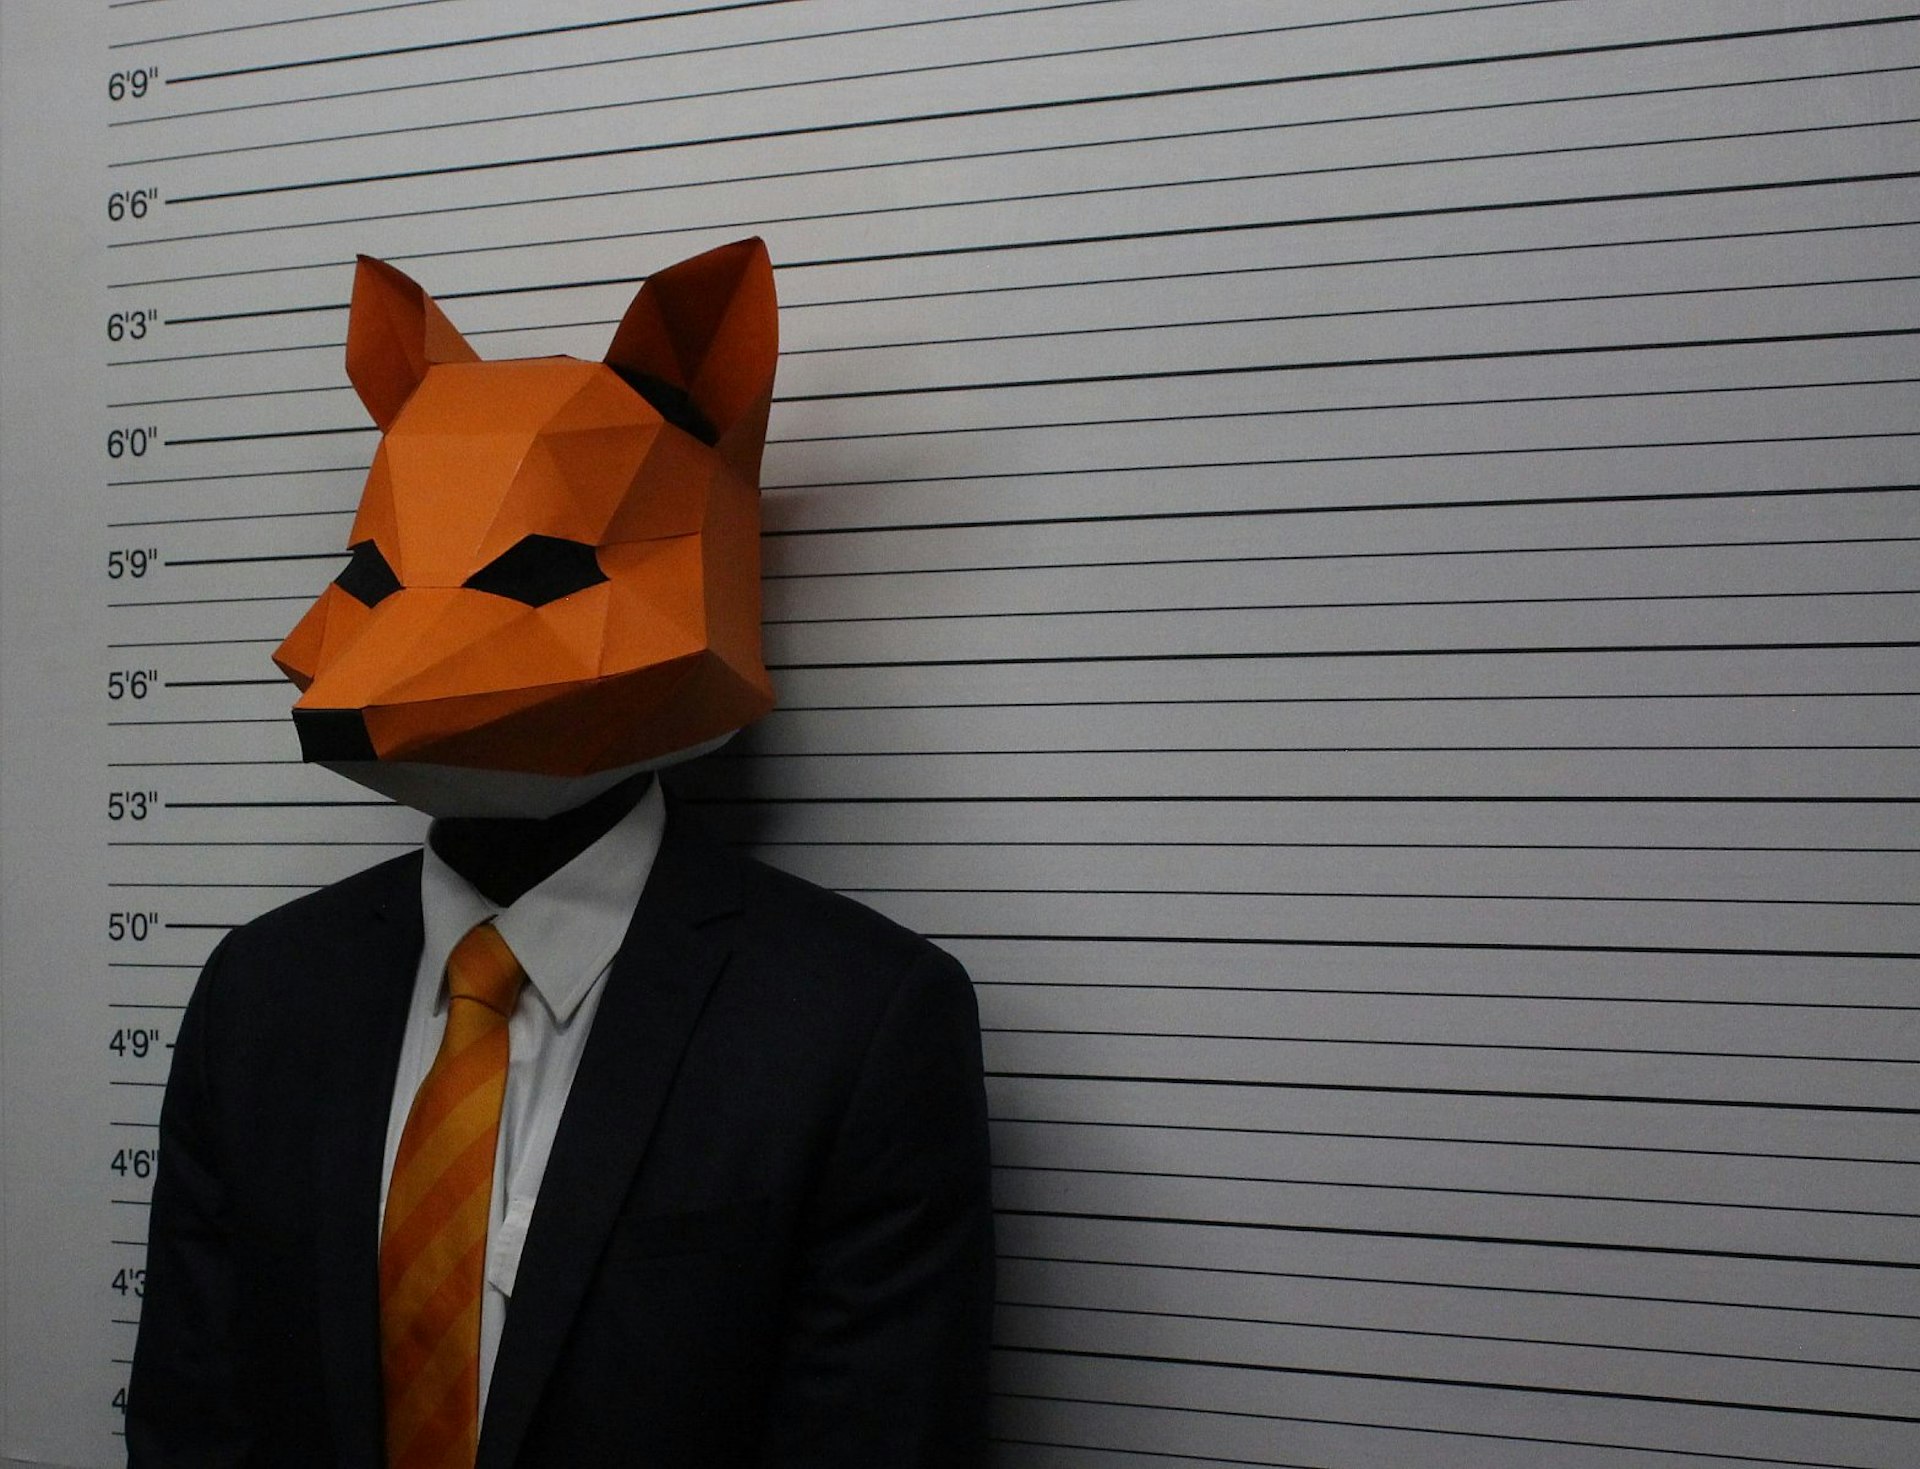 A person in a suit with a cardboard fox's head covering their own stands in front of a height chart as if in a police lineup.